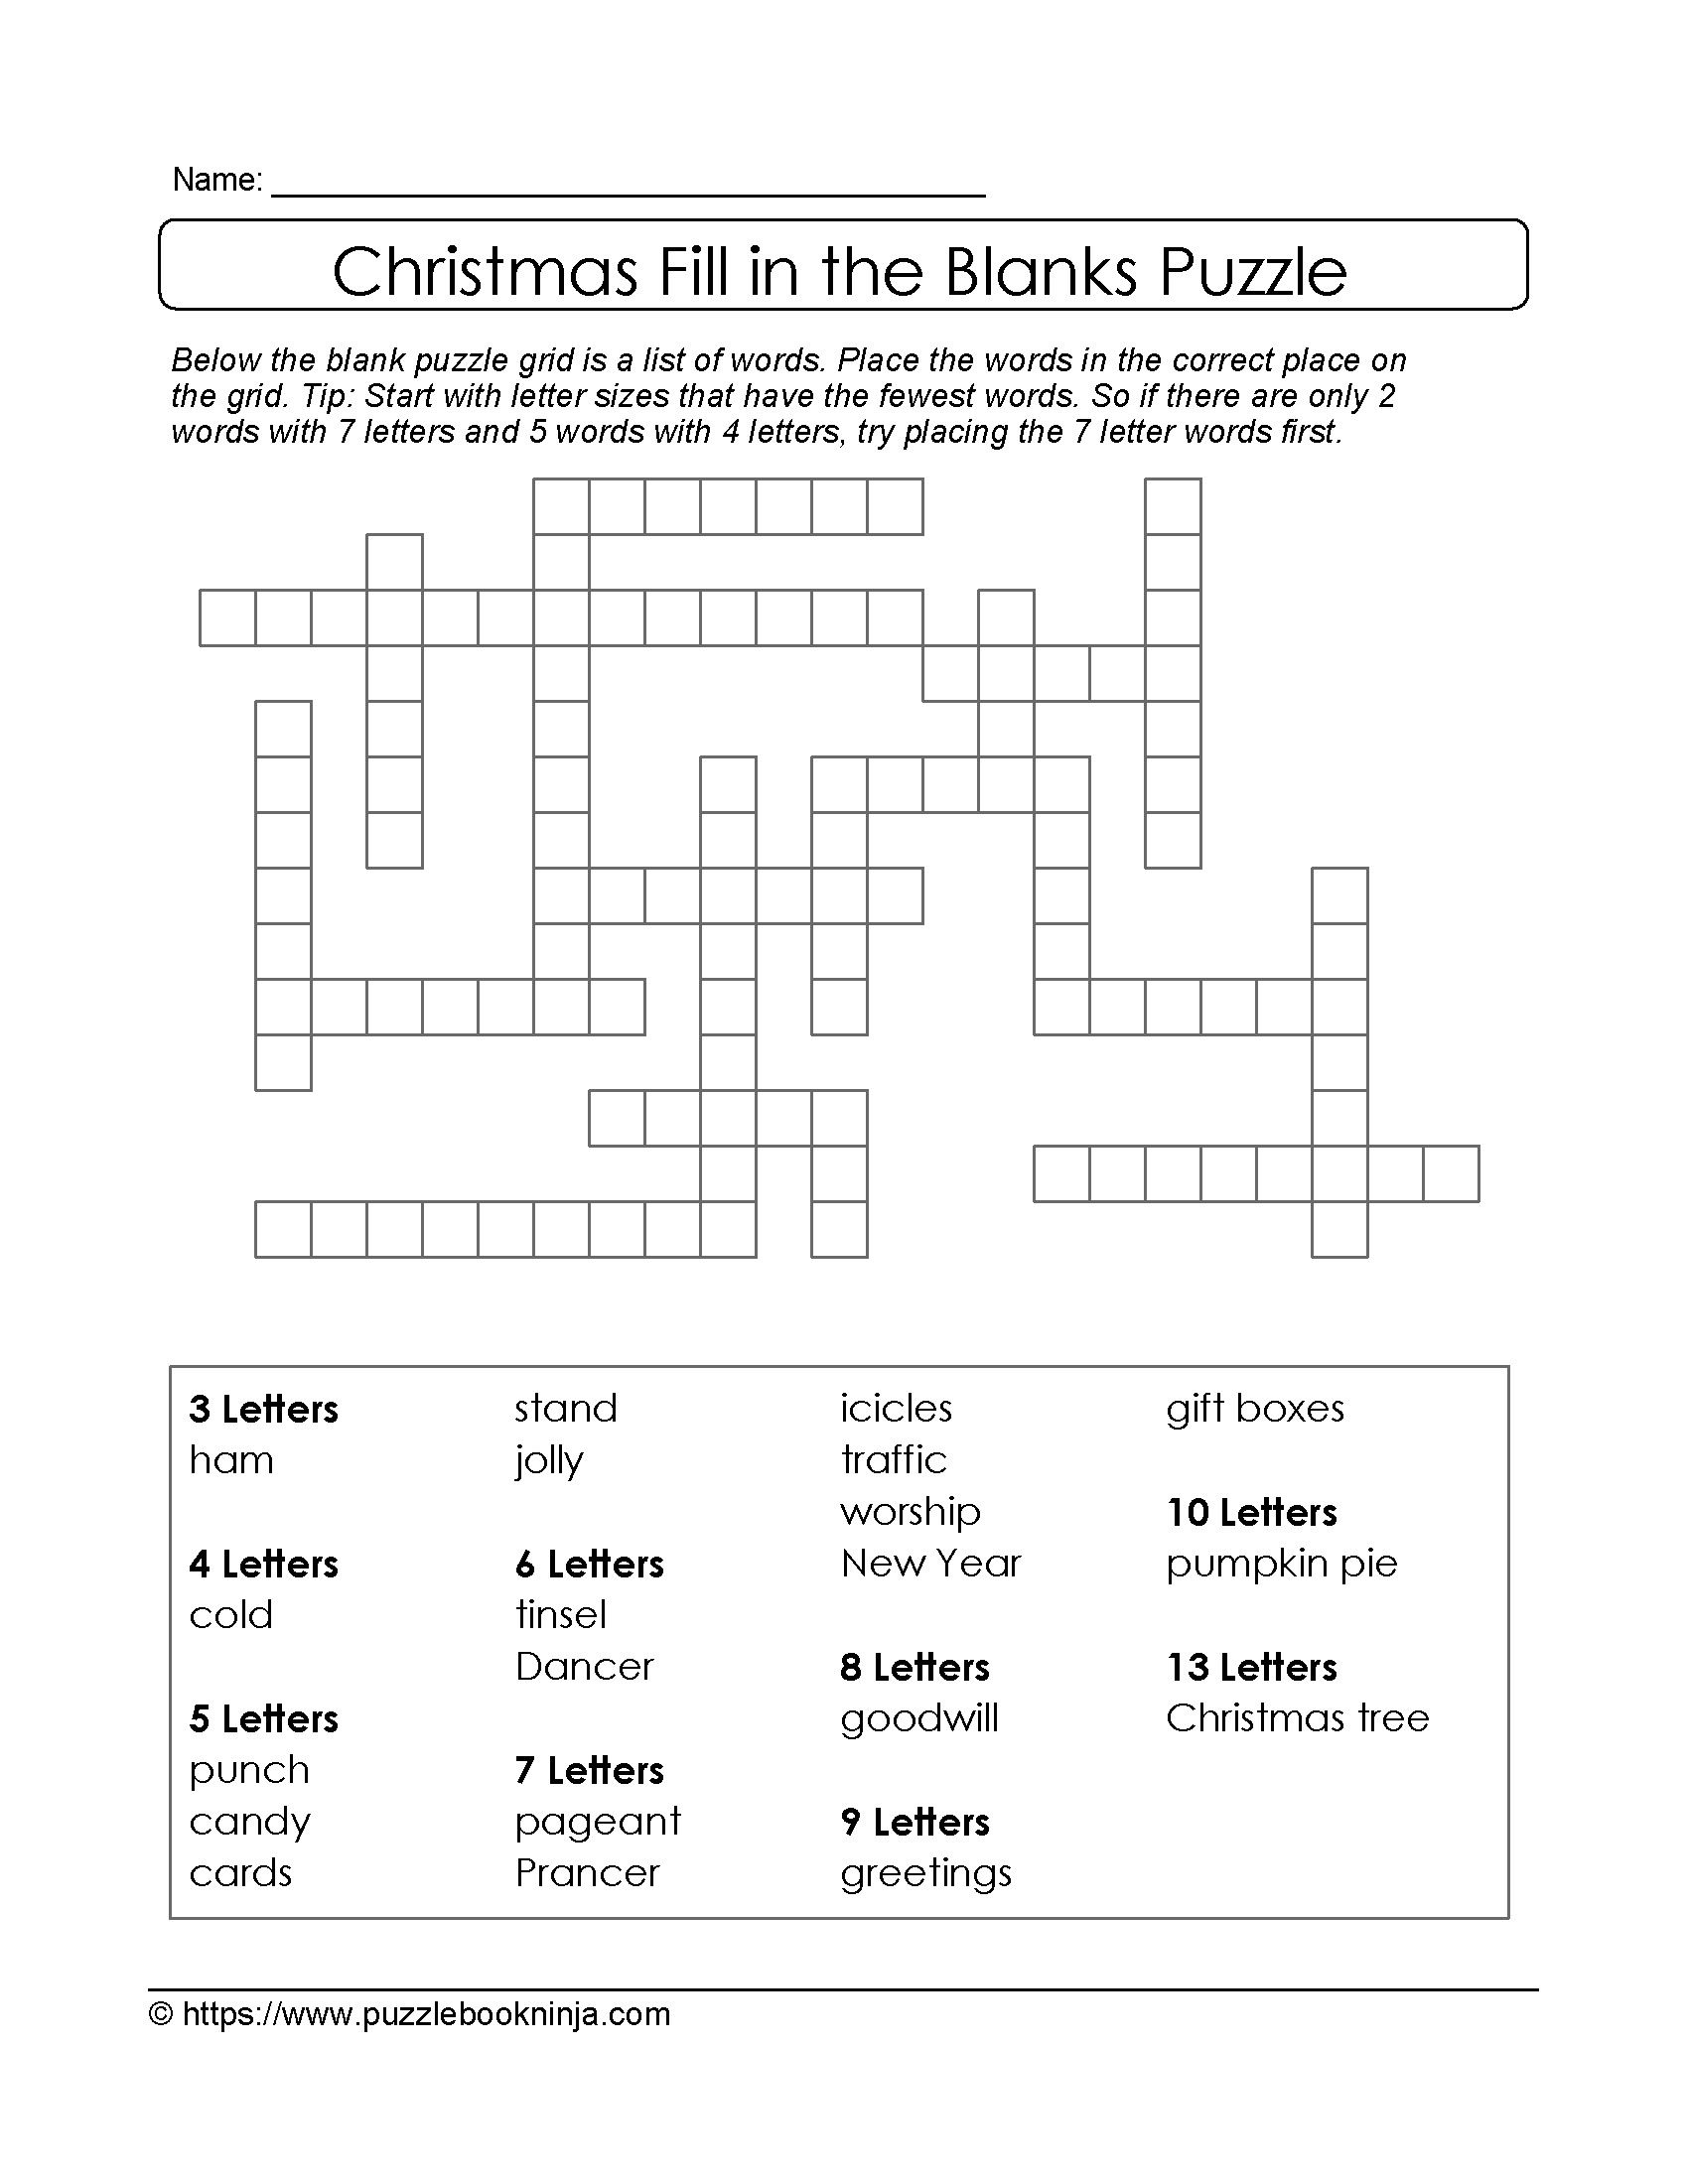 Freebie Xmas Puzzle To Print. Fill In The Blanks Crossword Like - Printable Xmas Crossword Puzzles